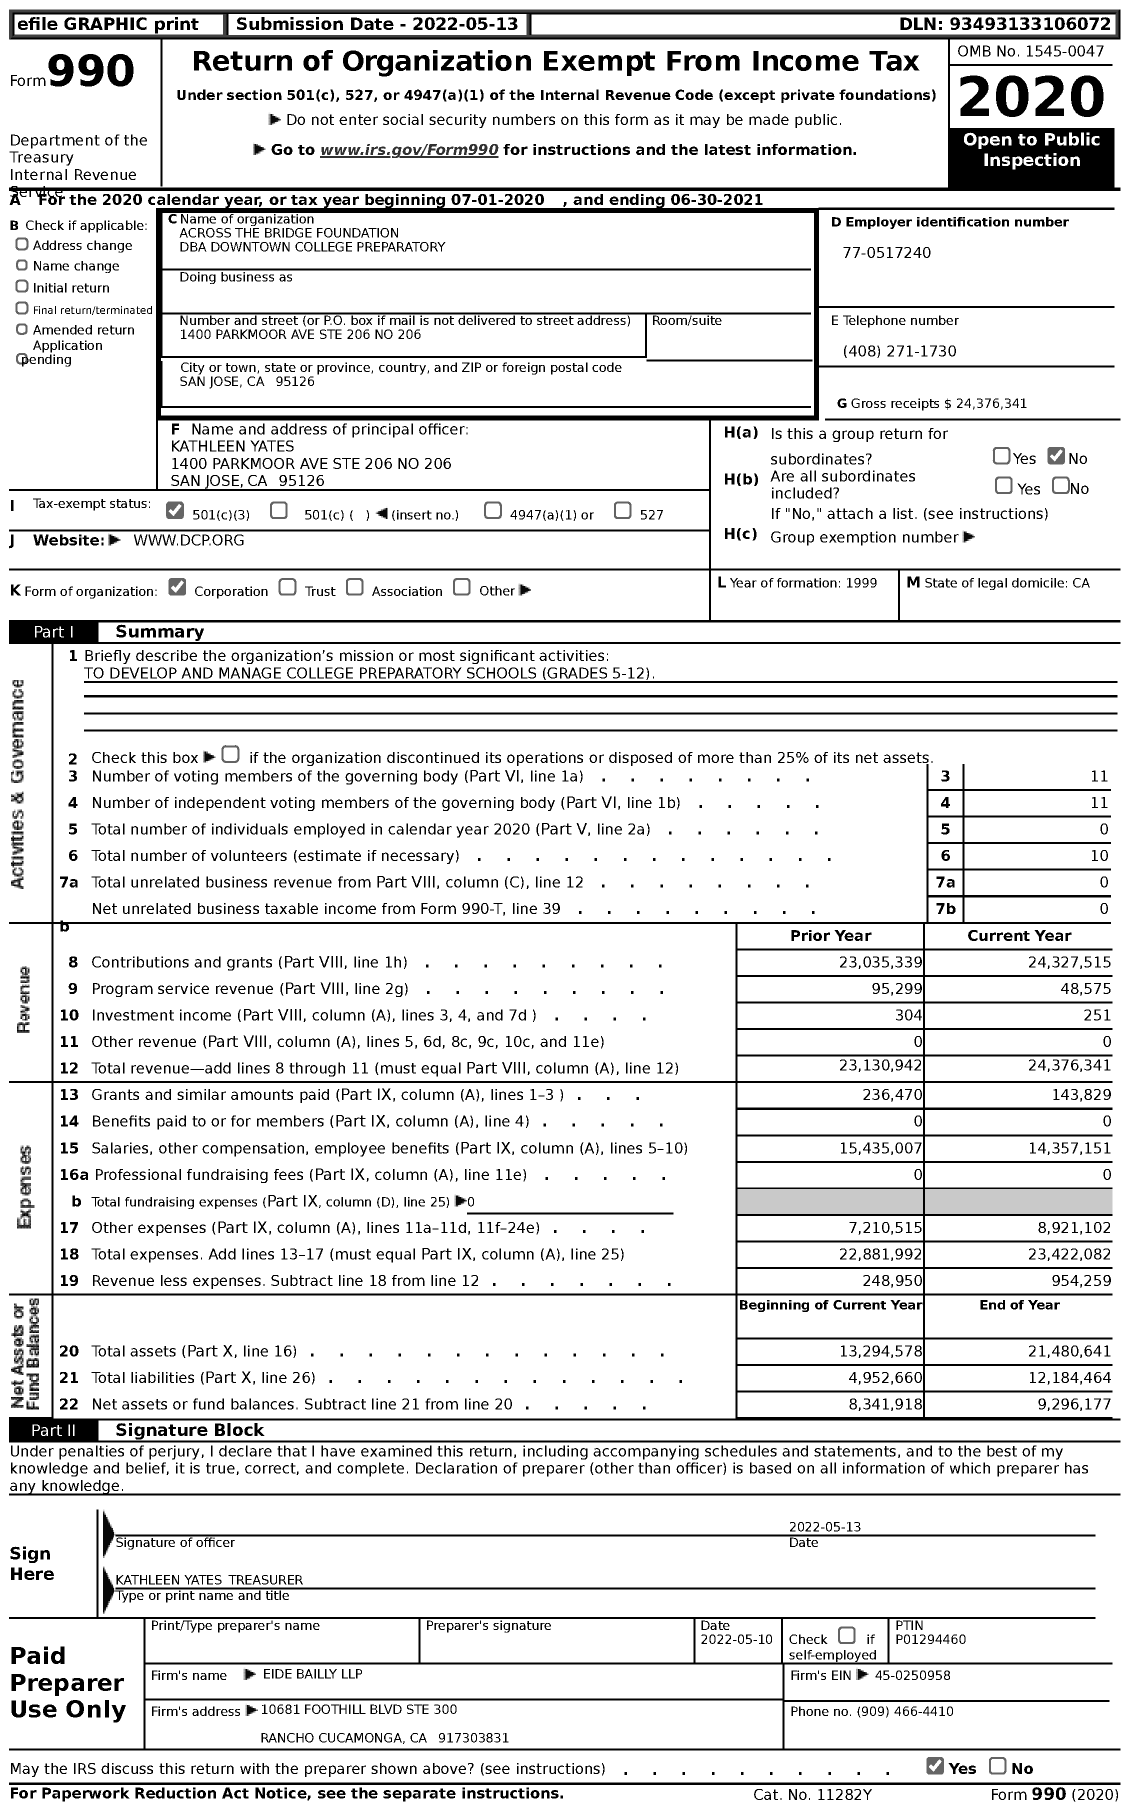 Image of first page of 2020 Form 990 for Downtown College Preparatory (DCP)